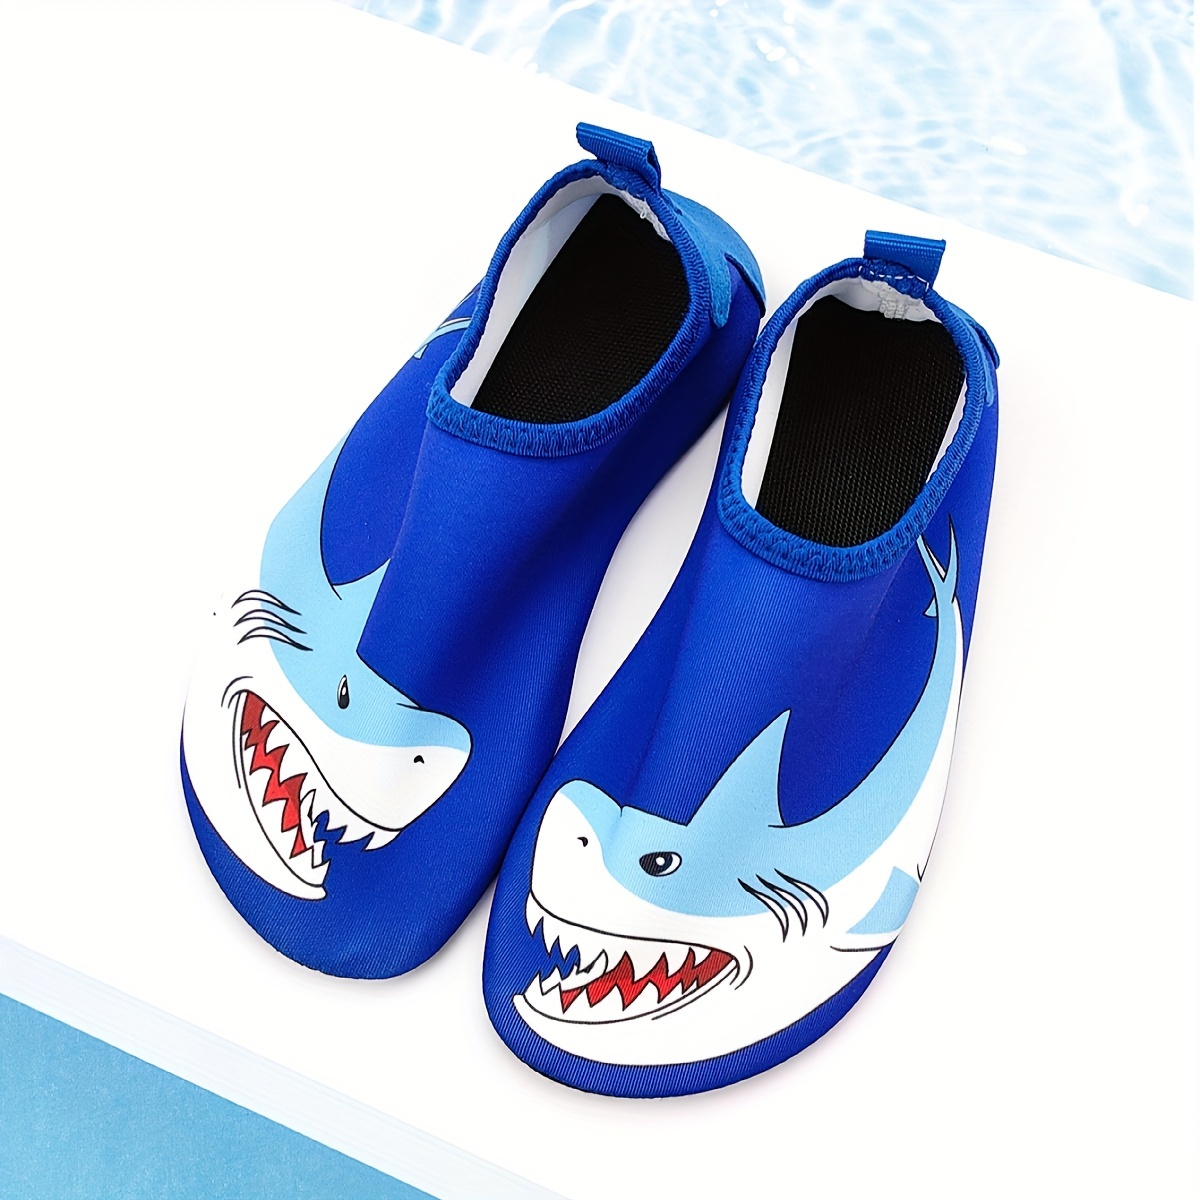 

Breathable Lightweight Beach Shoes For Boys, Cartoon Blue Shark Slip On Barefoot Shoes, Outdoor Swimming Surfing Wading Shoes, Soft Sole Water Shoes, Elastic Socks Shoes